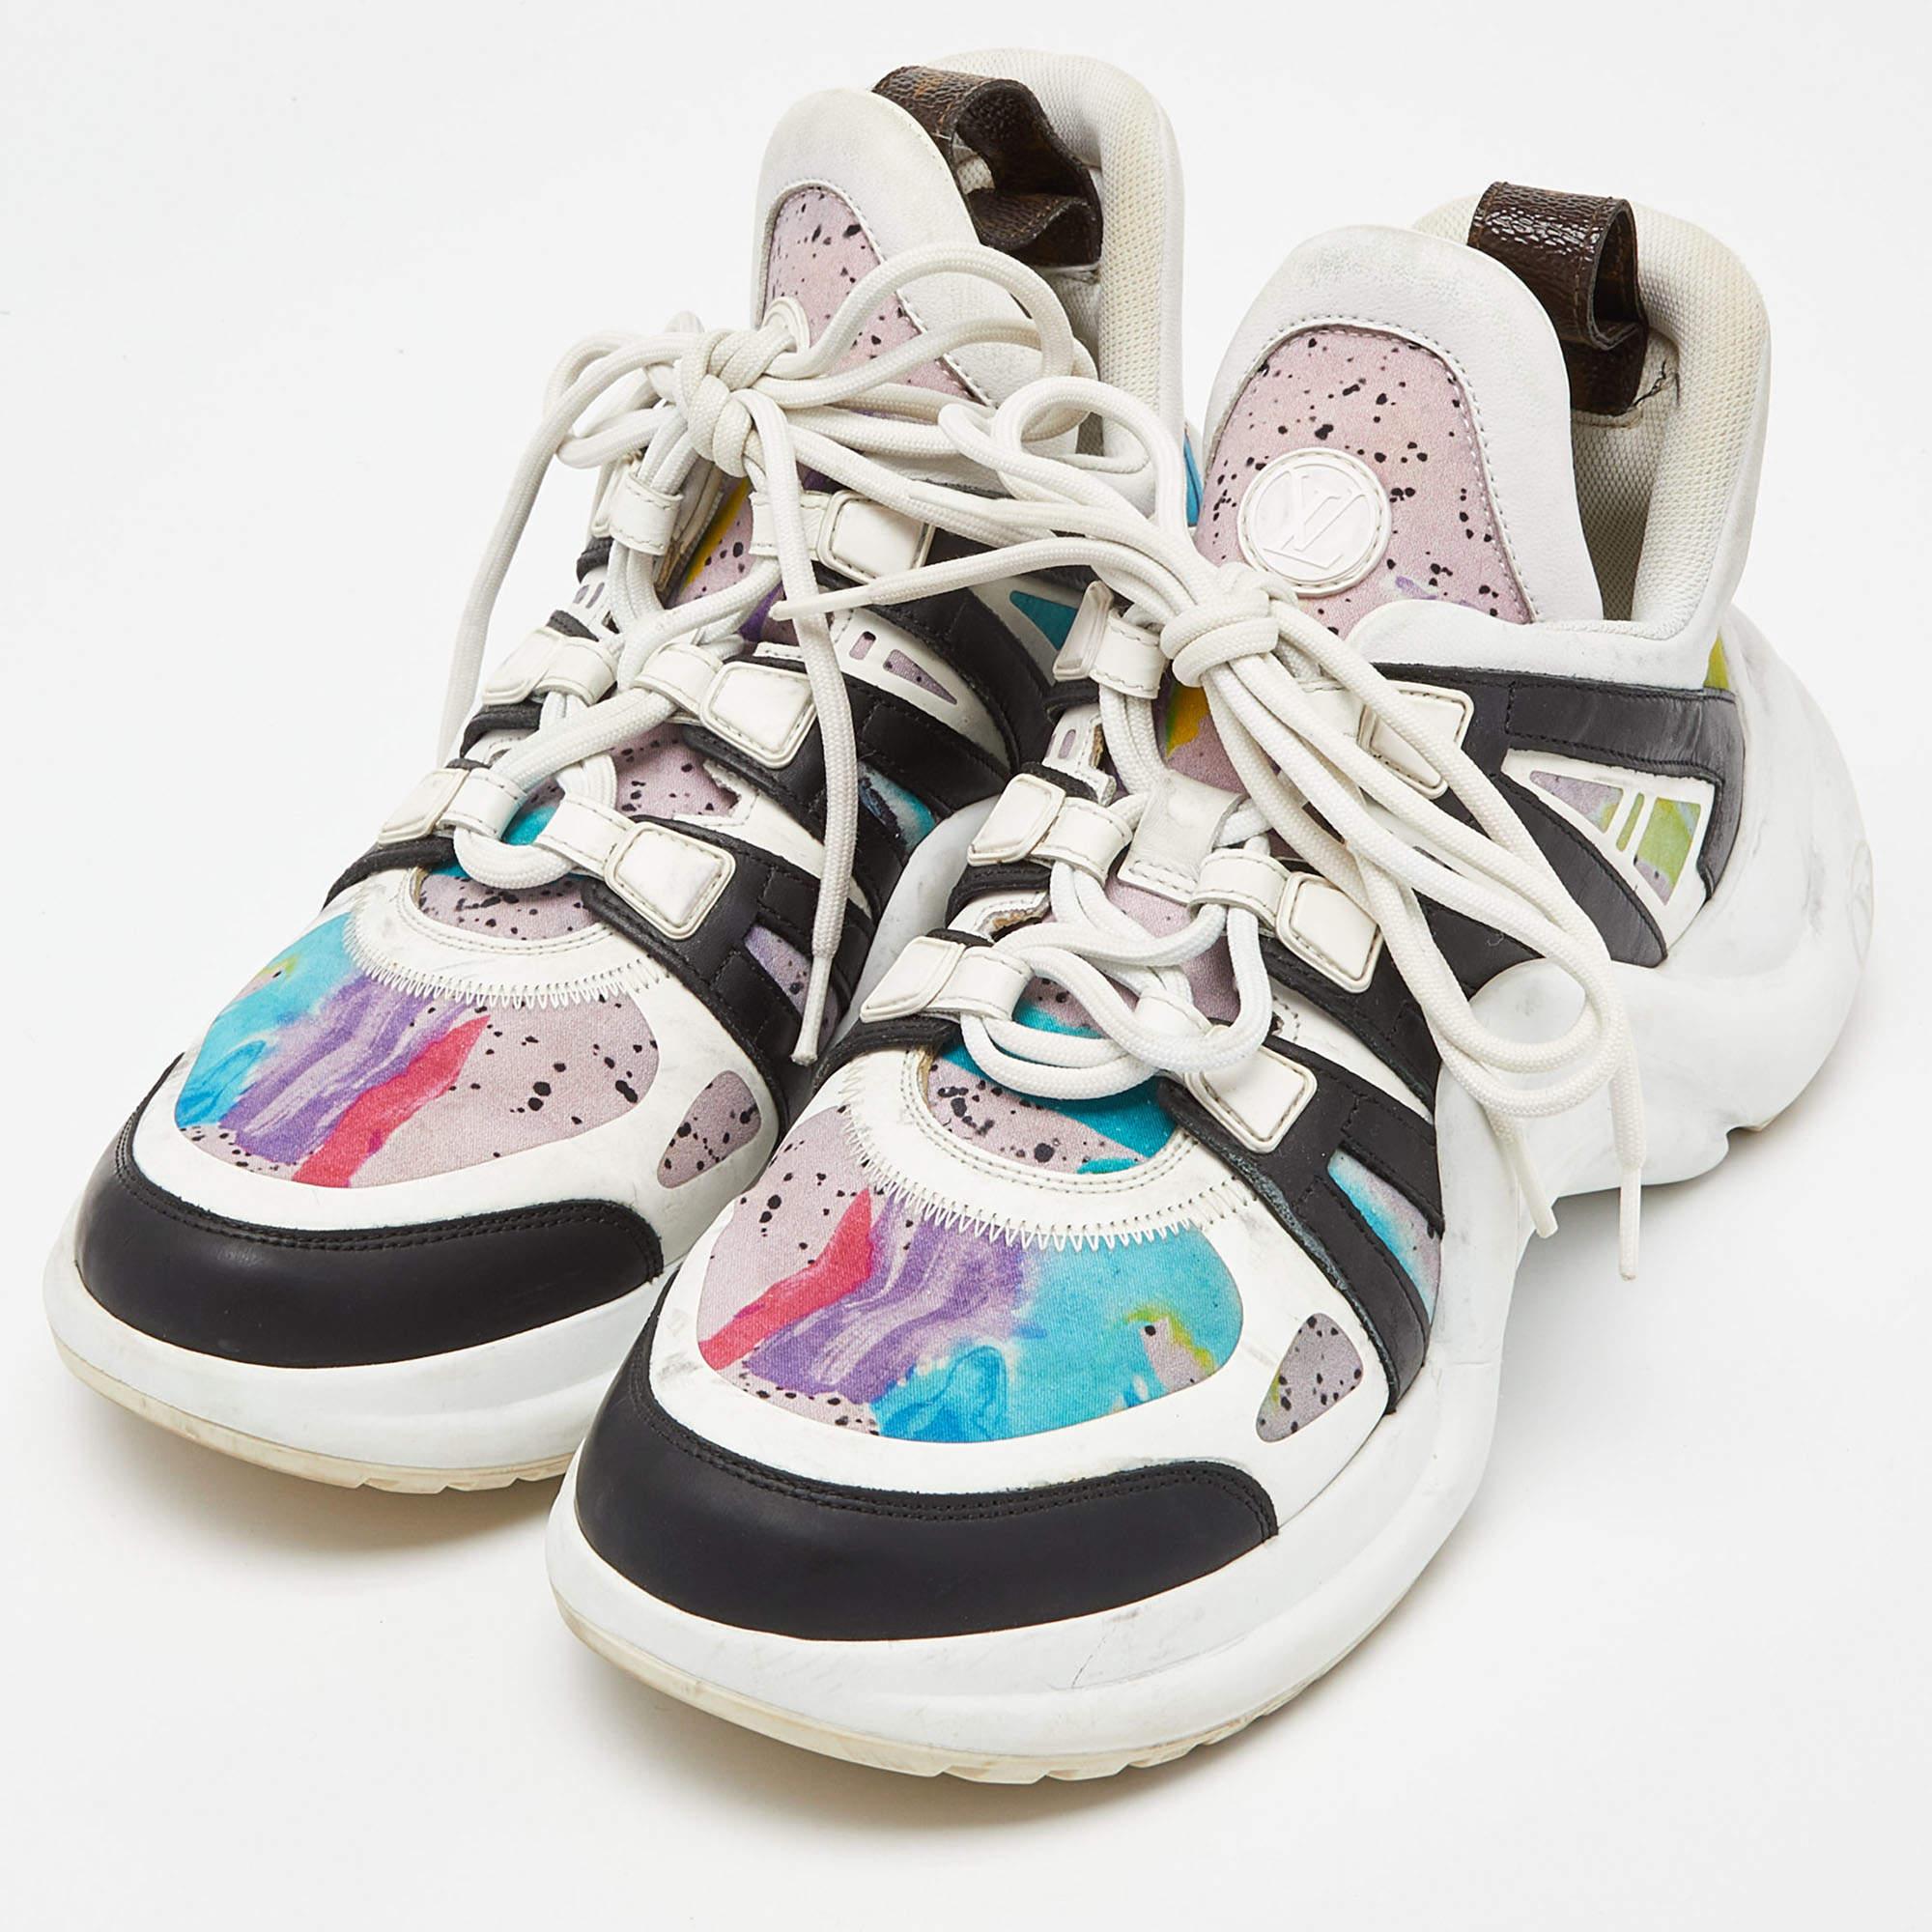 The Spring/Summer 2018 collection by Louis Vuitton introduced us to the Archlight sneakers at a time when the fever of chunky sneakers had just set in. The design is characterized by a futuristic vibe with a tinge of influence from vintage